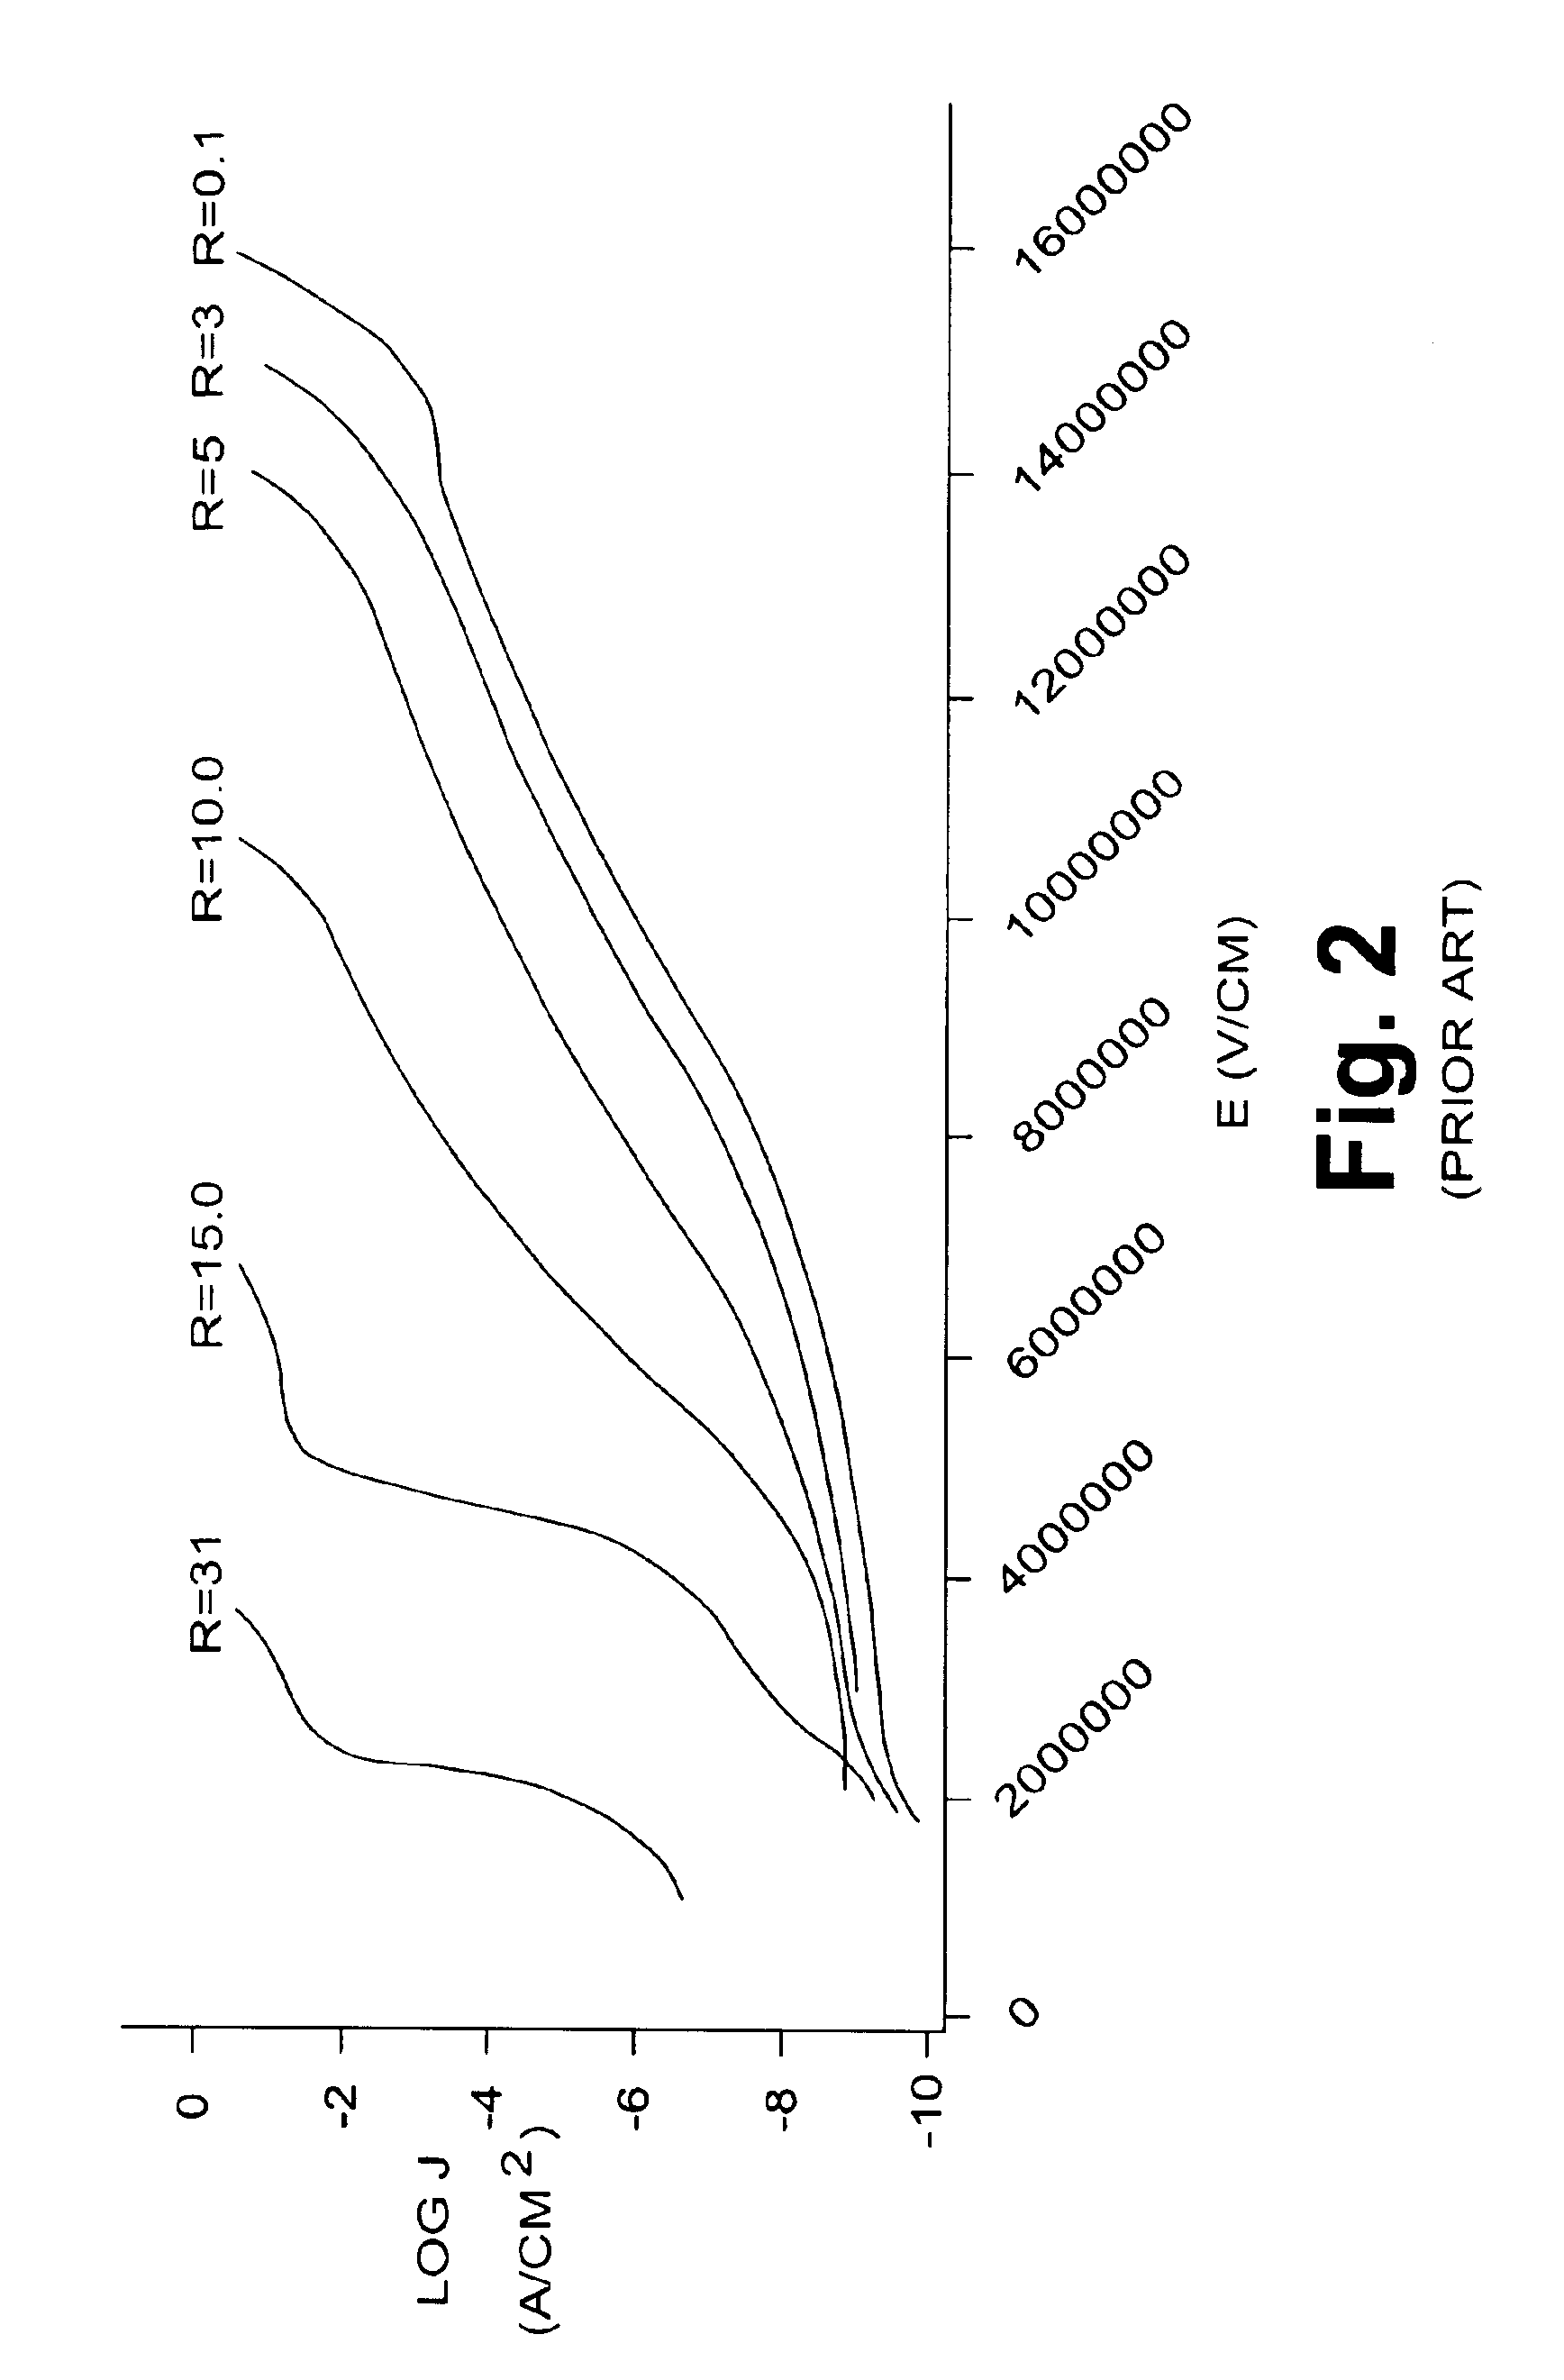 Decoupling capacitor for high frequency noise immunity